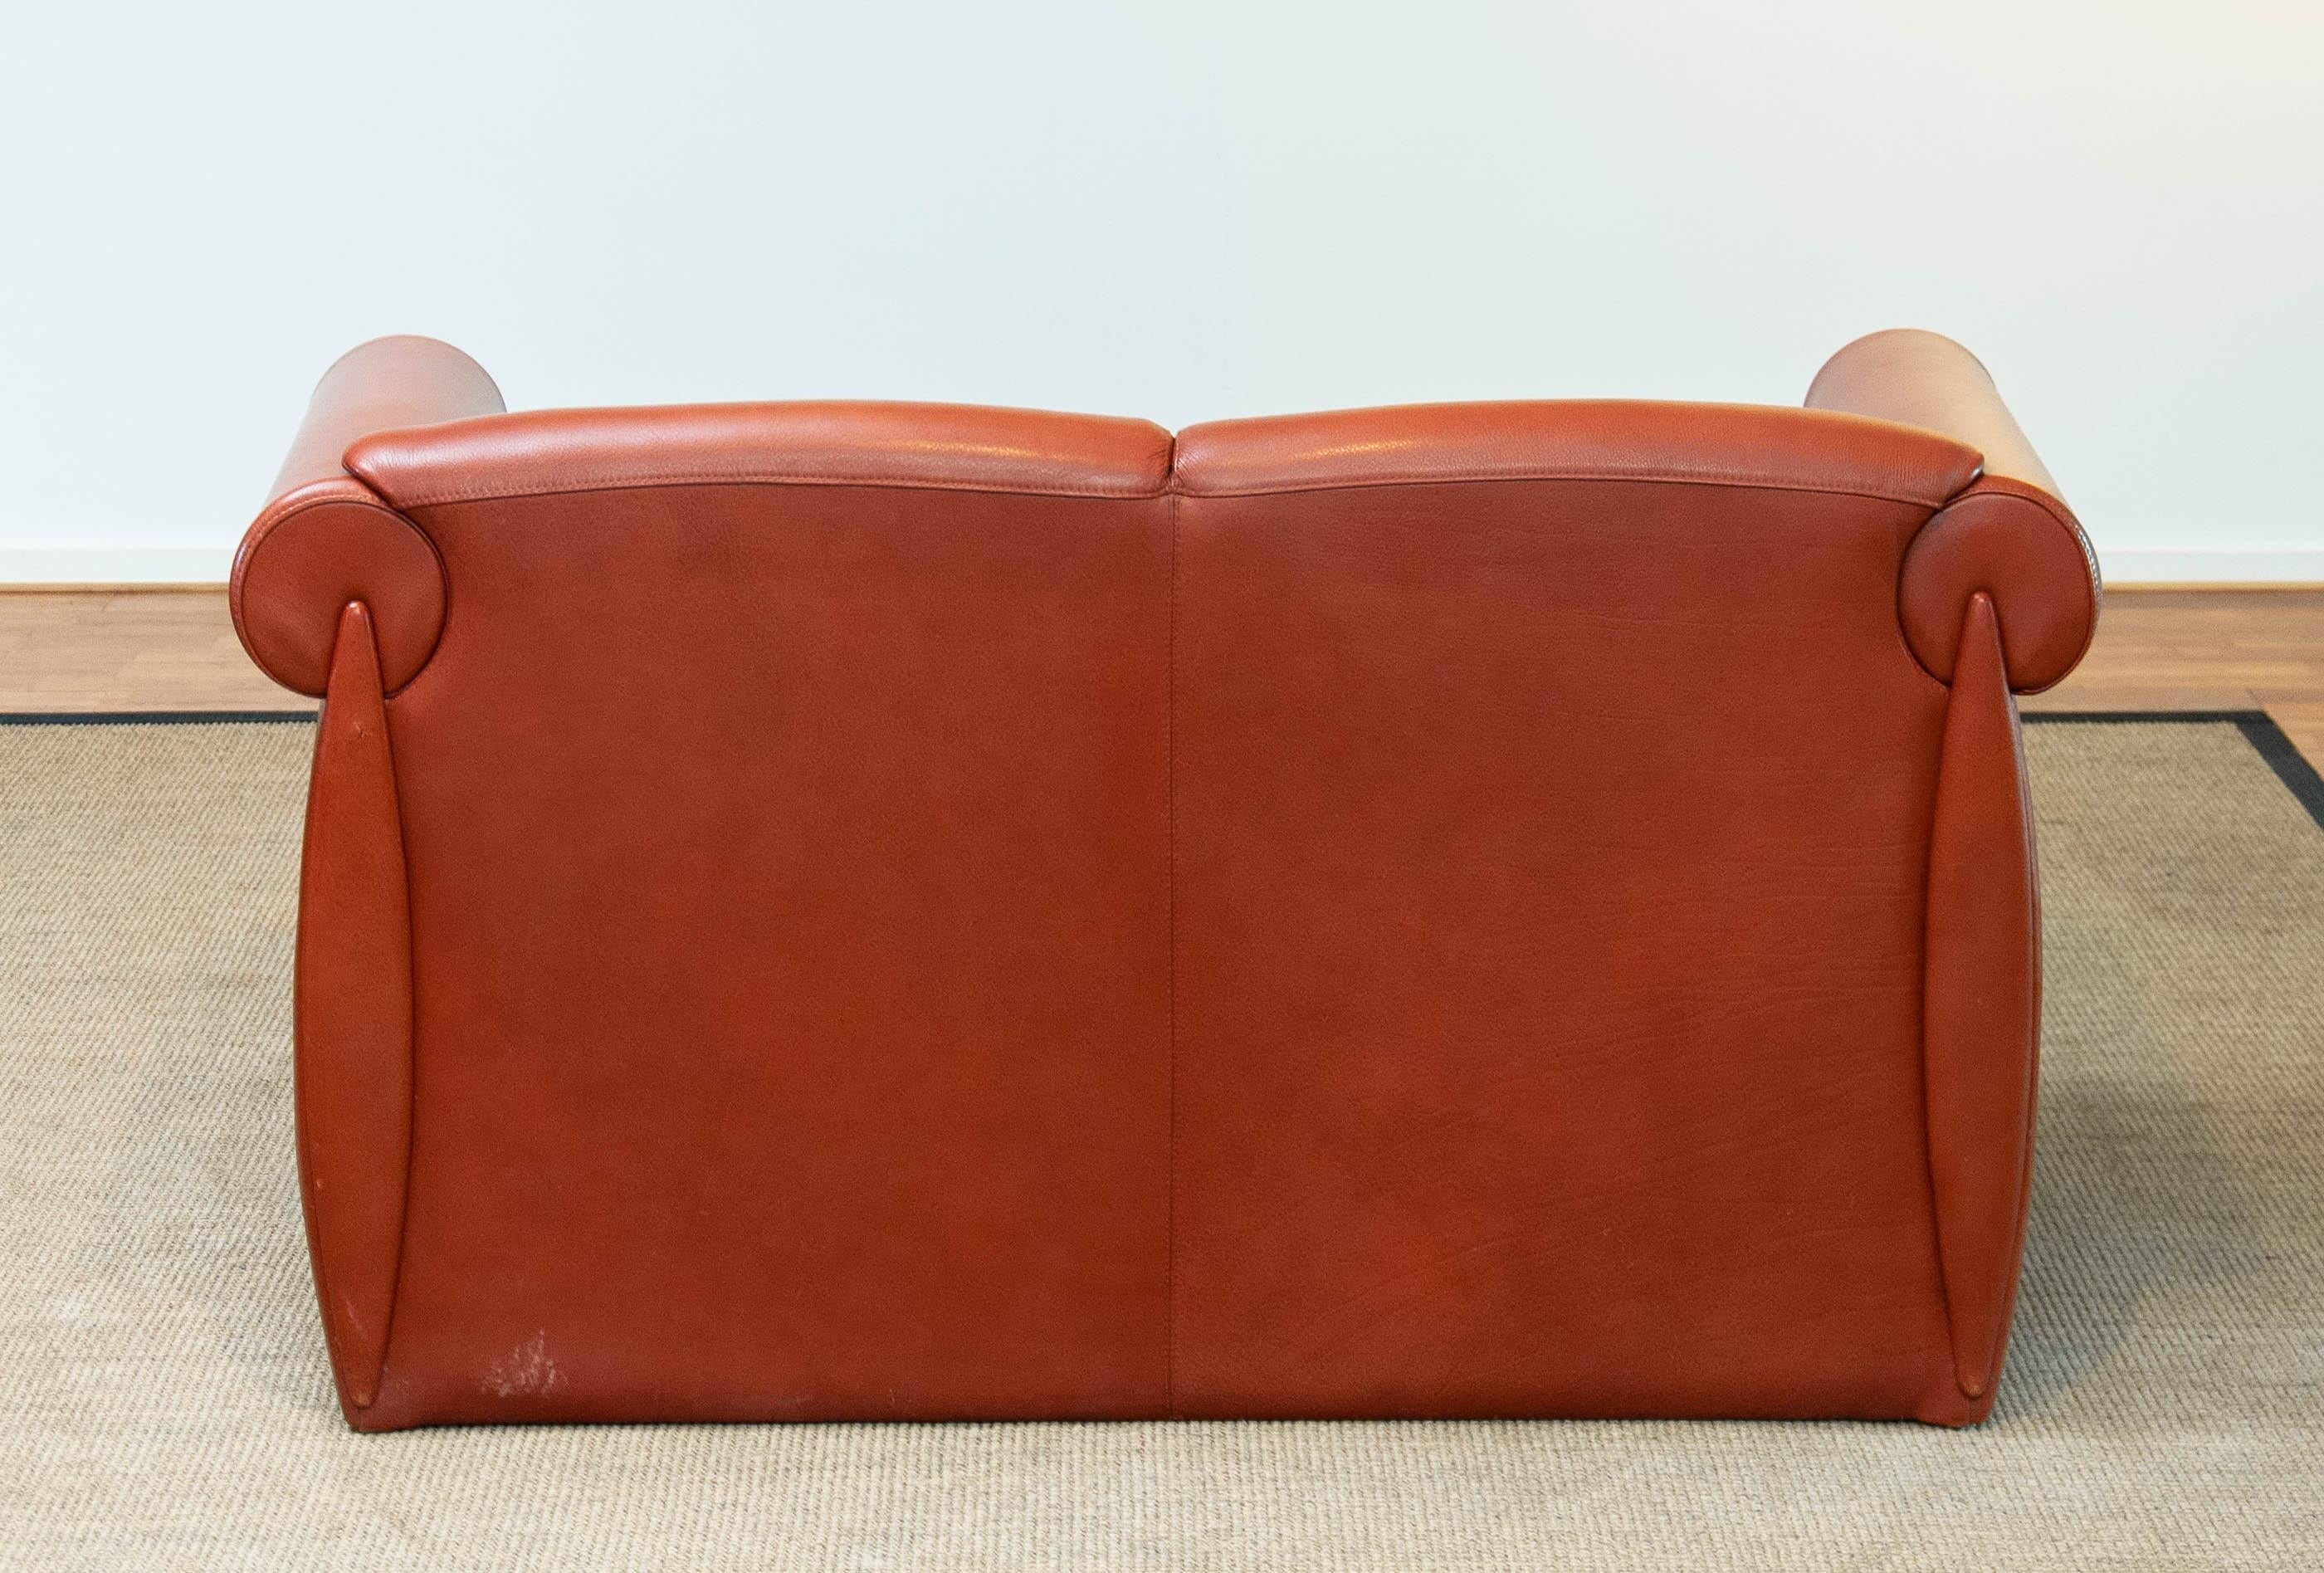 1980s Modern Two Seater Sofa in Cognac Leather by Klaus Wettergren Denmark For Sale 3